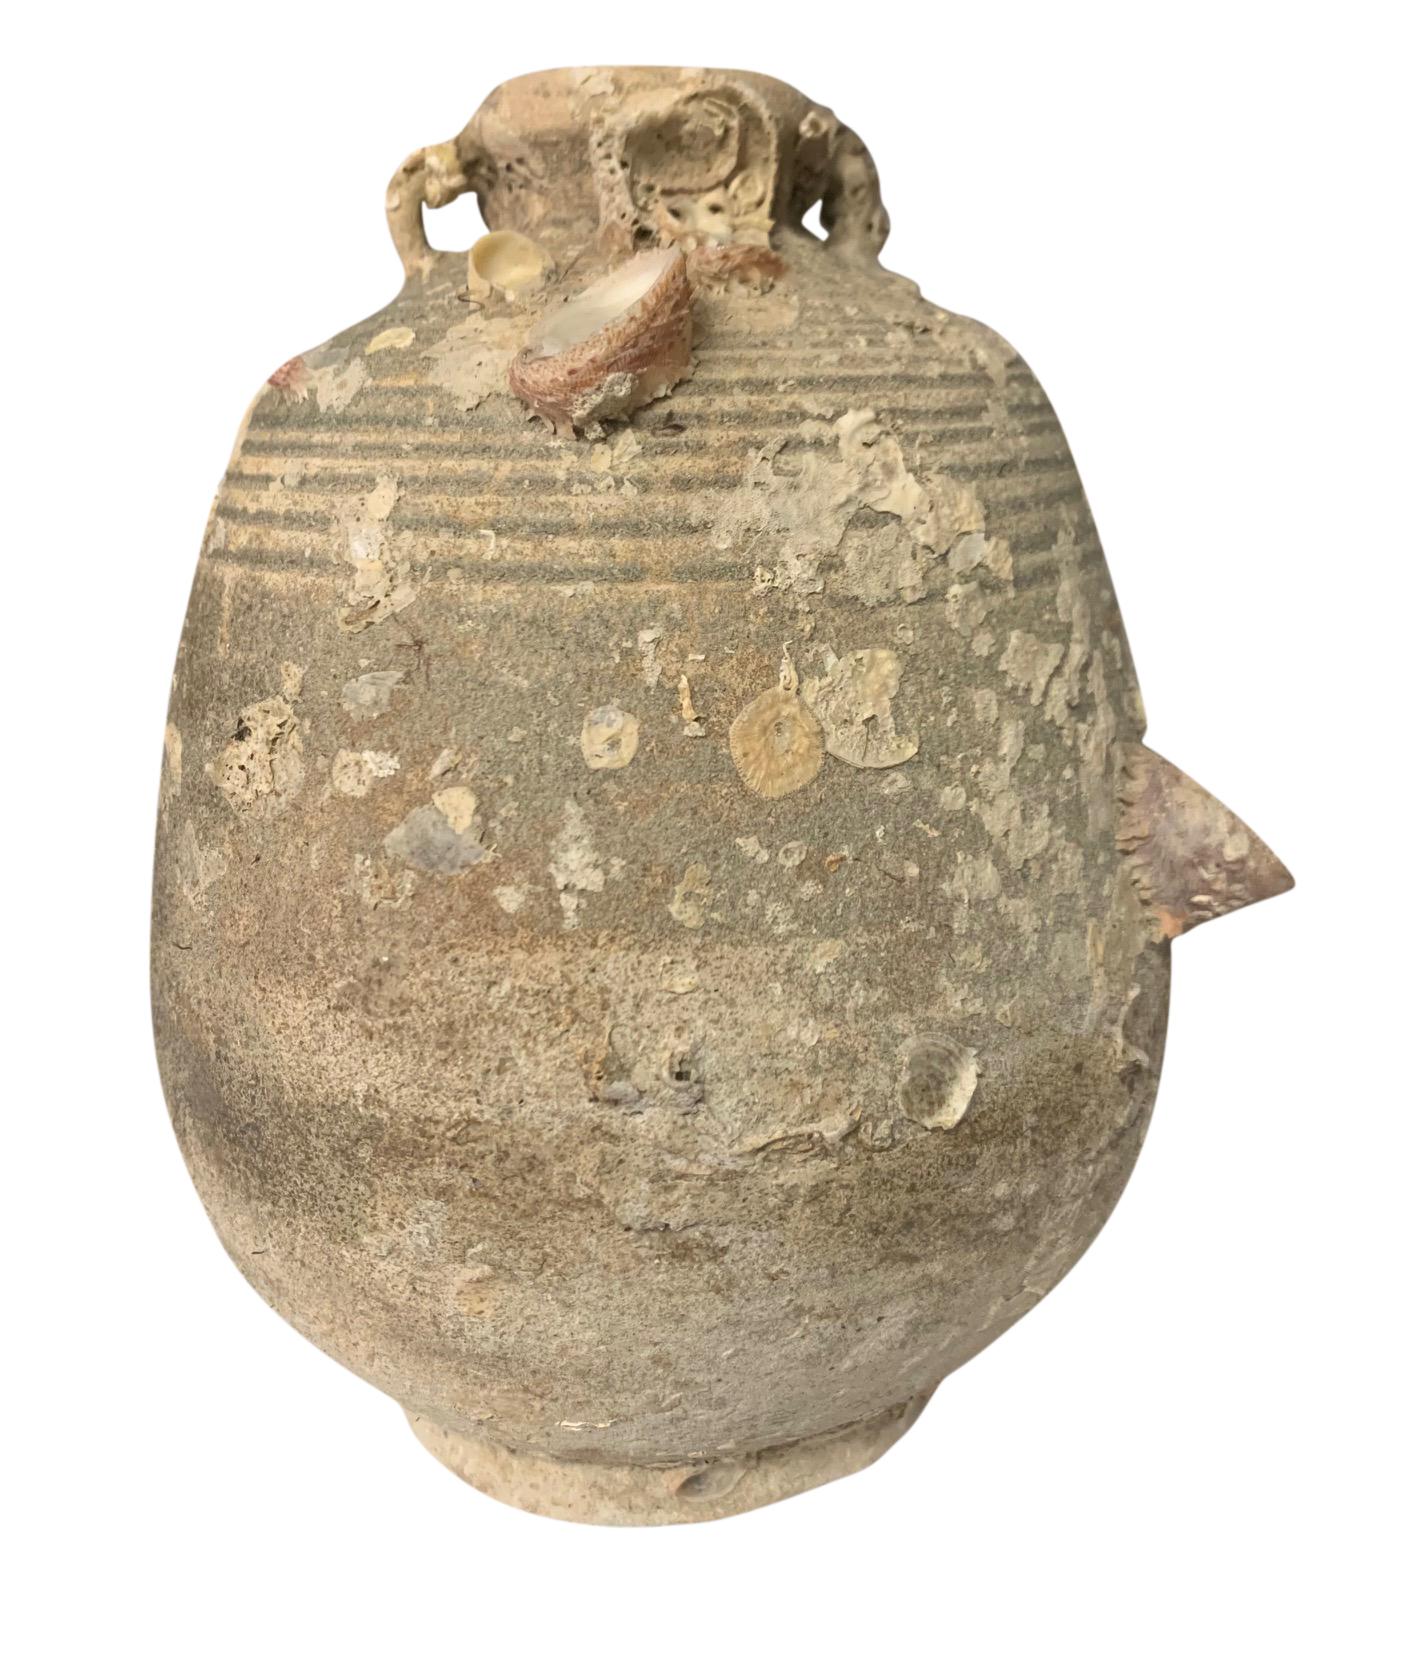 16th century Thailand Sawankhalok vessel from the Turiang shipwreck discovered in 1998 in the South China Sea.
Natural marine growth from being submerged for over 300 years.
From a large collection of vessels that survived and have been discovered.